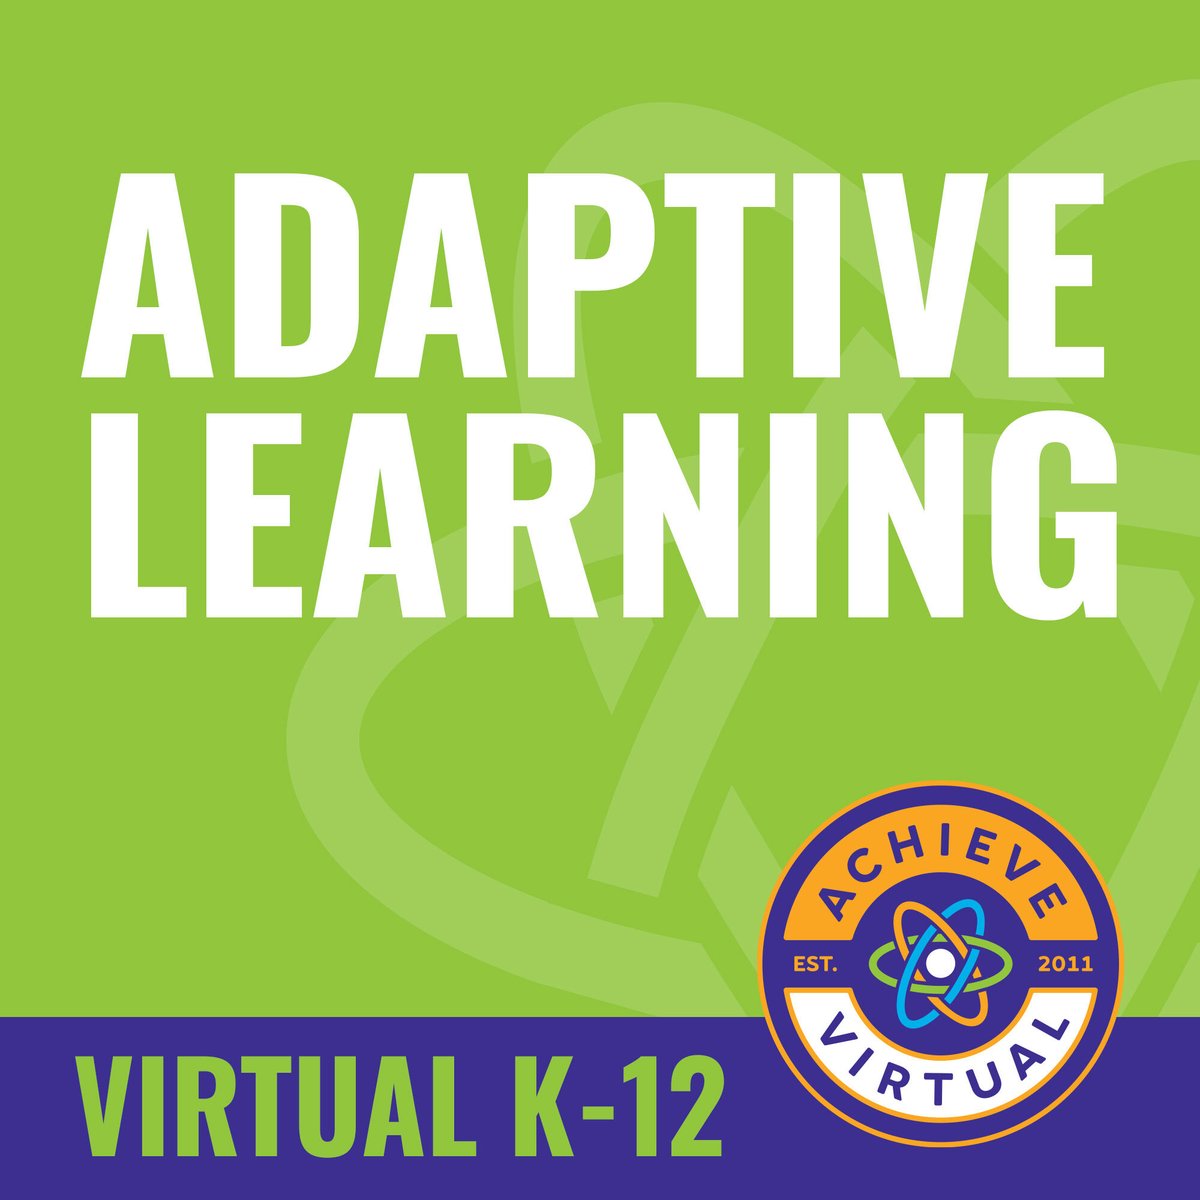 Adaptive learning is just what your teen needs to thrive. See how a #virtualeducation can provide that space. bit.ly/3vvctCr